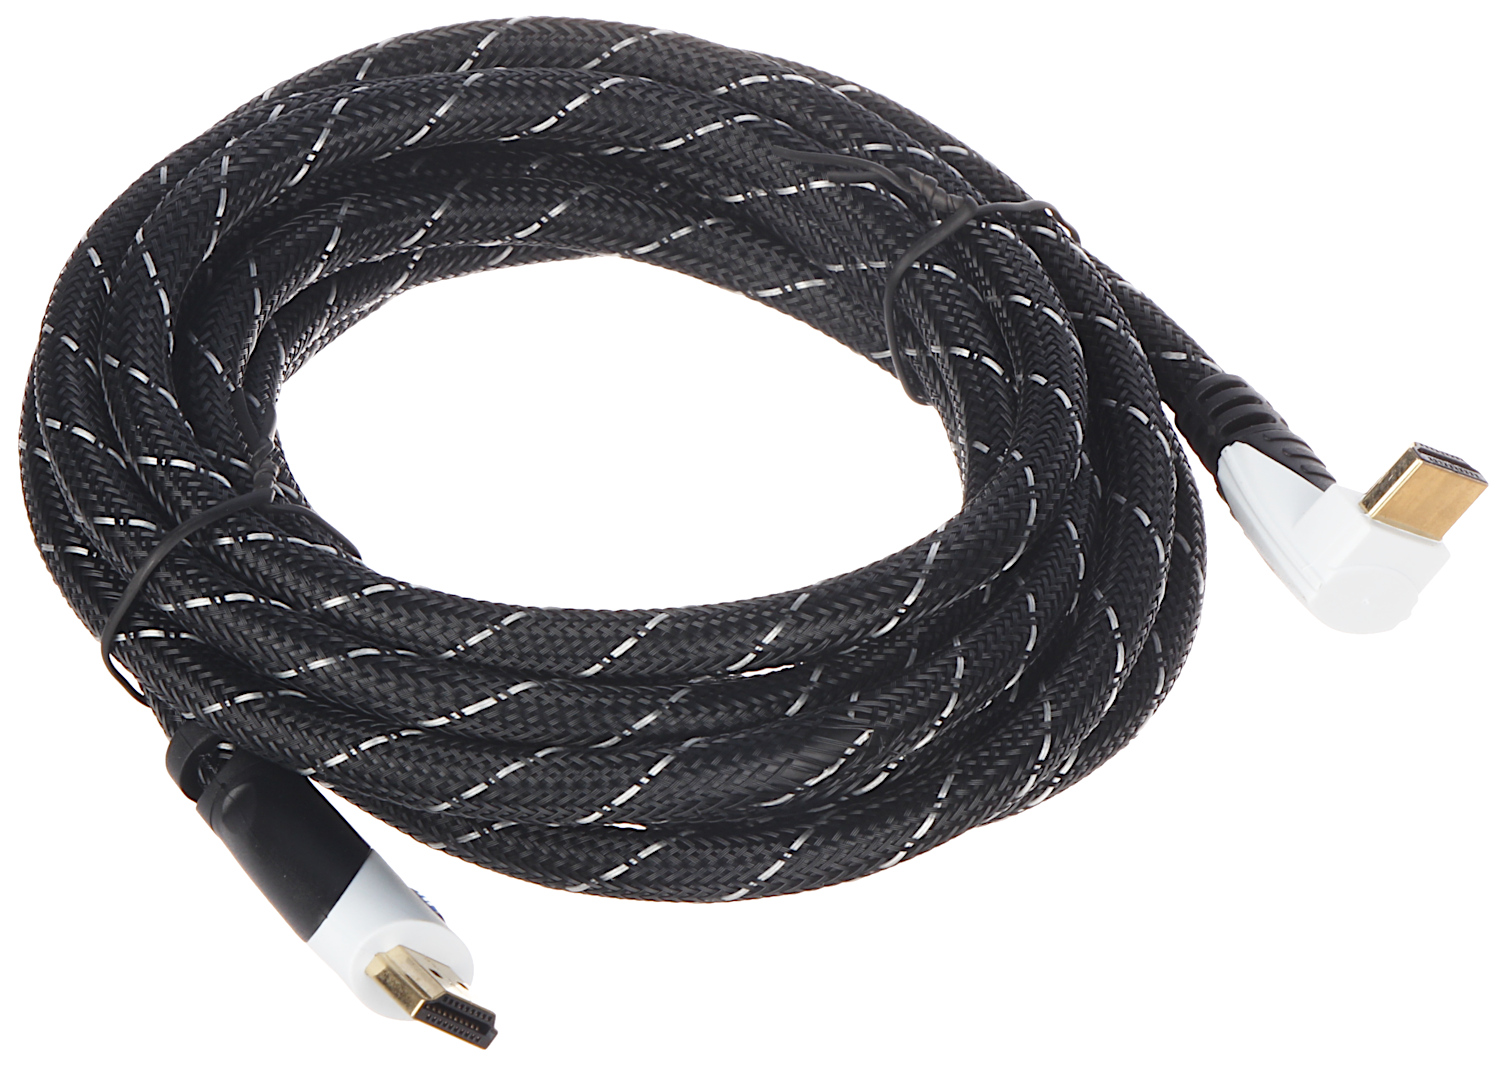 CABLE HDMI-3.0 3 m - HDMI Cables up to 3 m Length - Delta